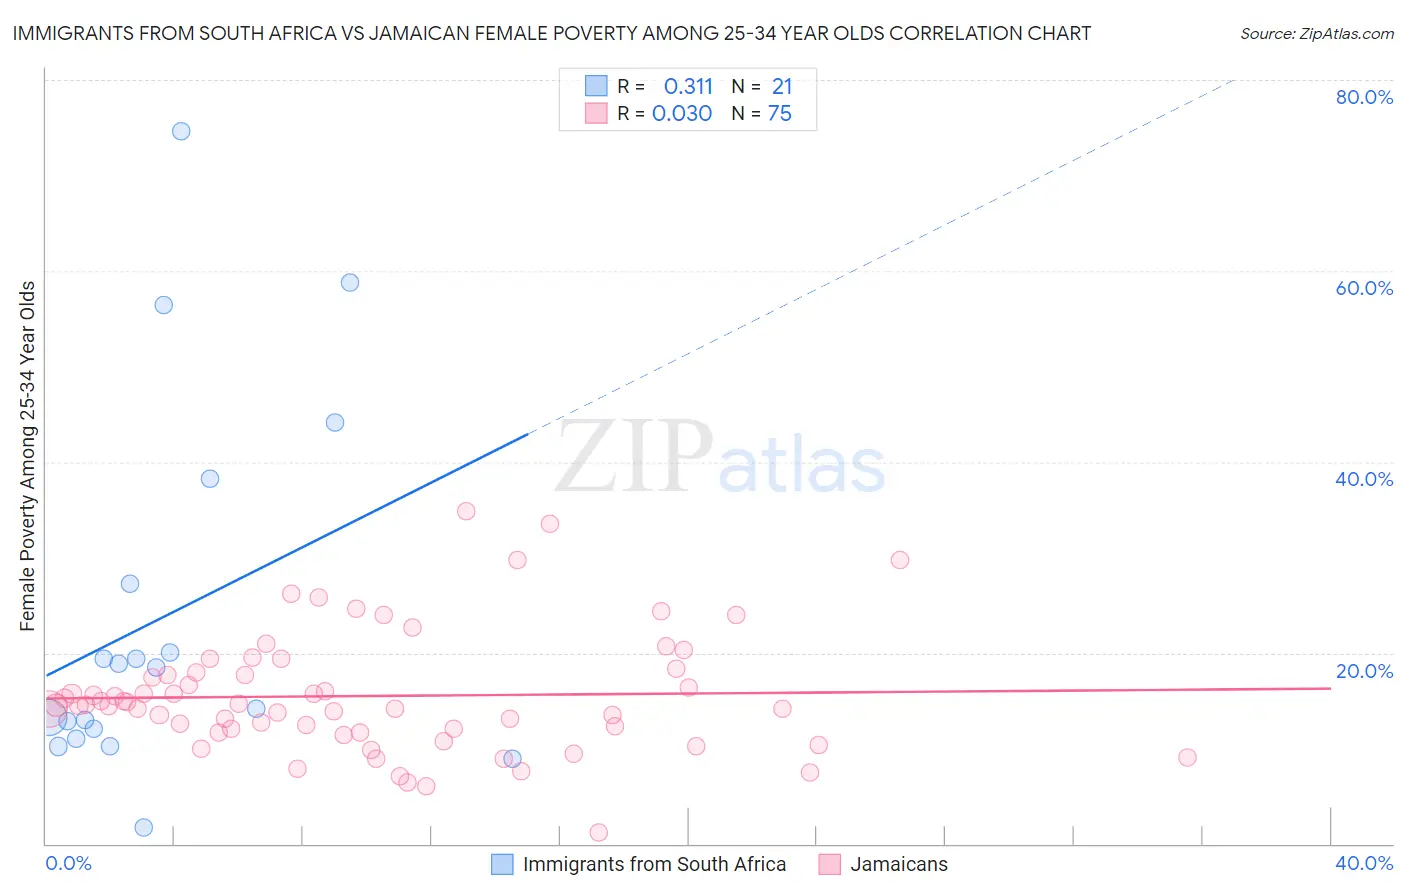 Immigrants from South Africa vs Jamaican Female Poverty Among 25-34 Year Olds